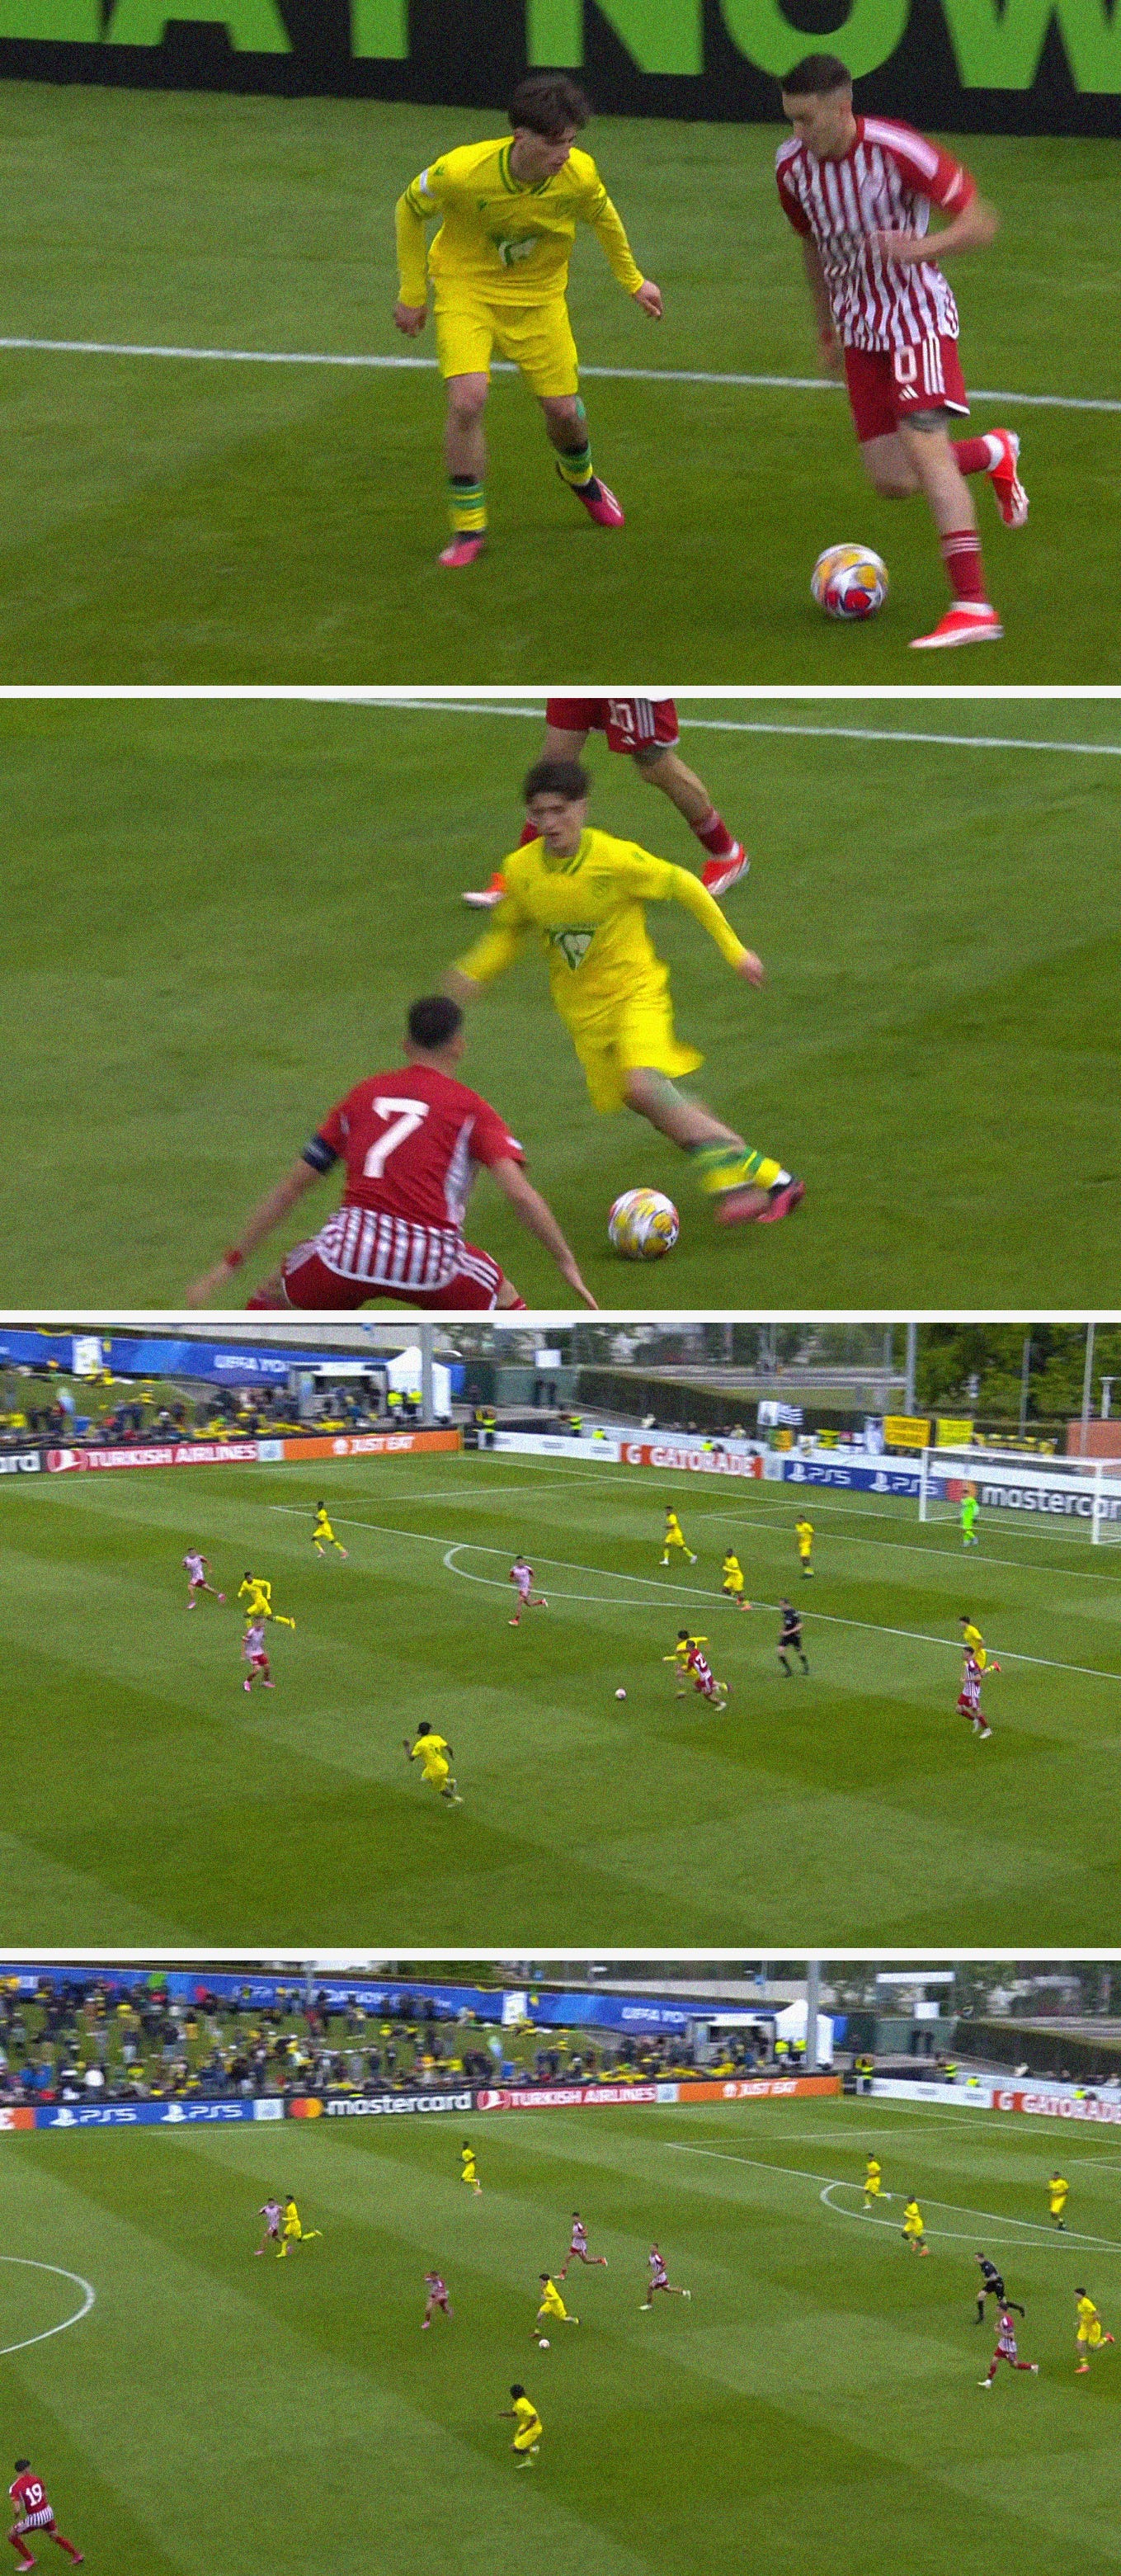 A sequence of screenshots showing Nantes' Louka Gautier carrying the ball past defenders